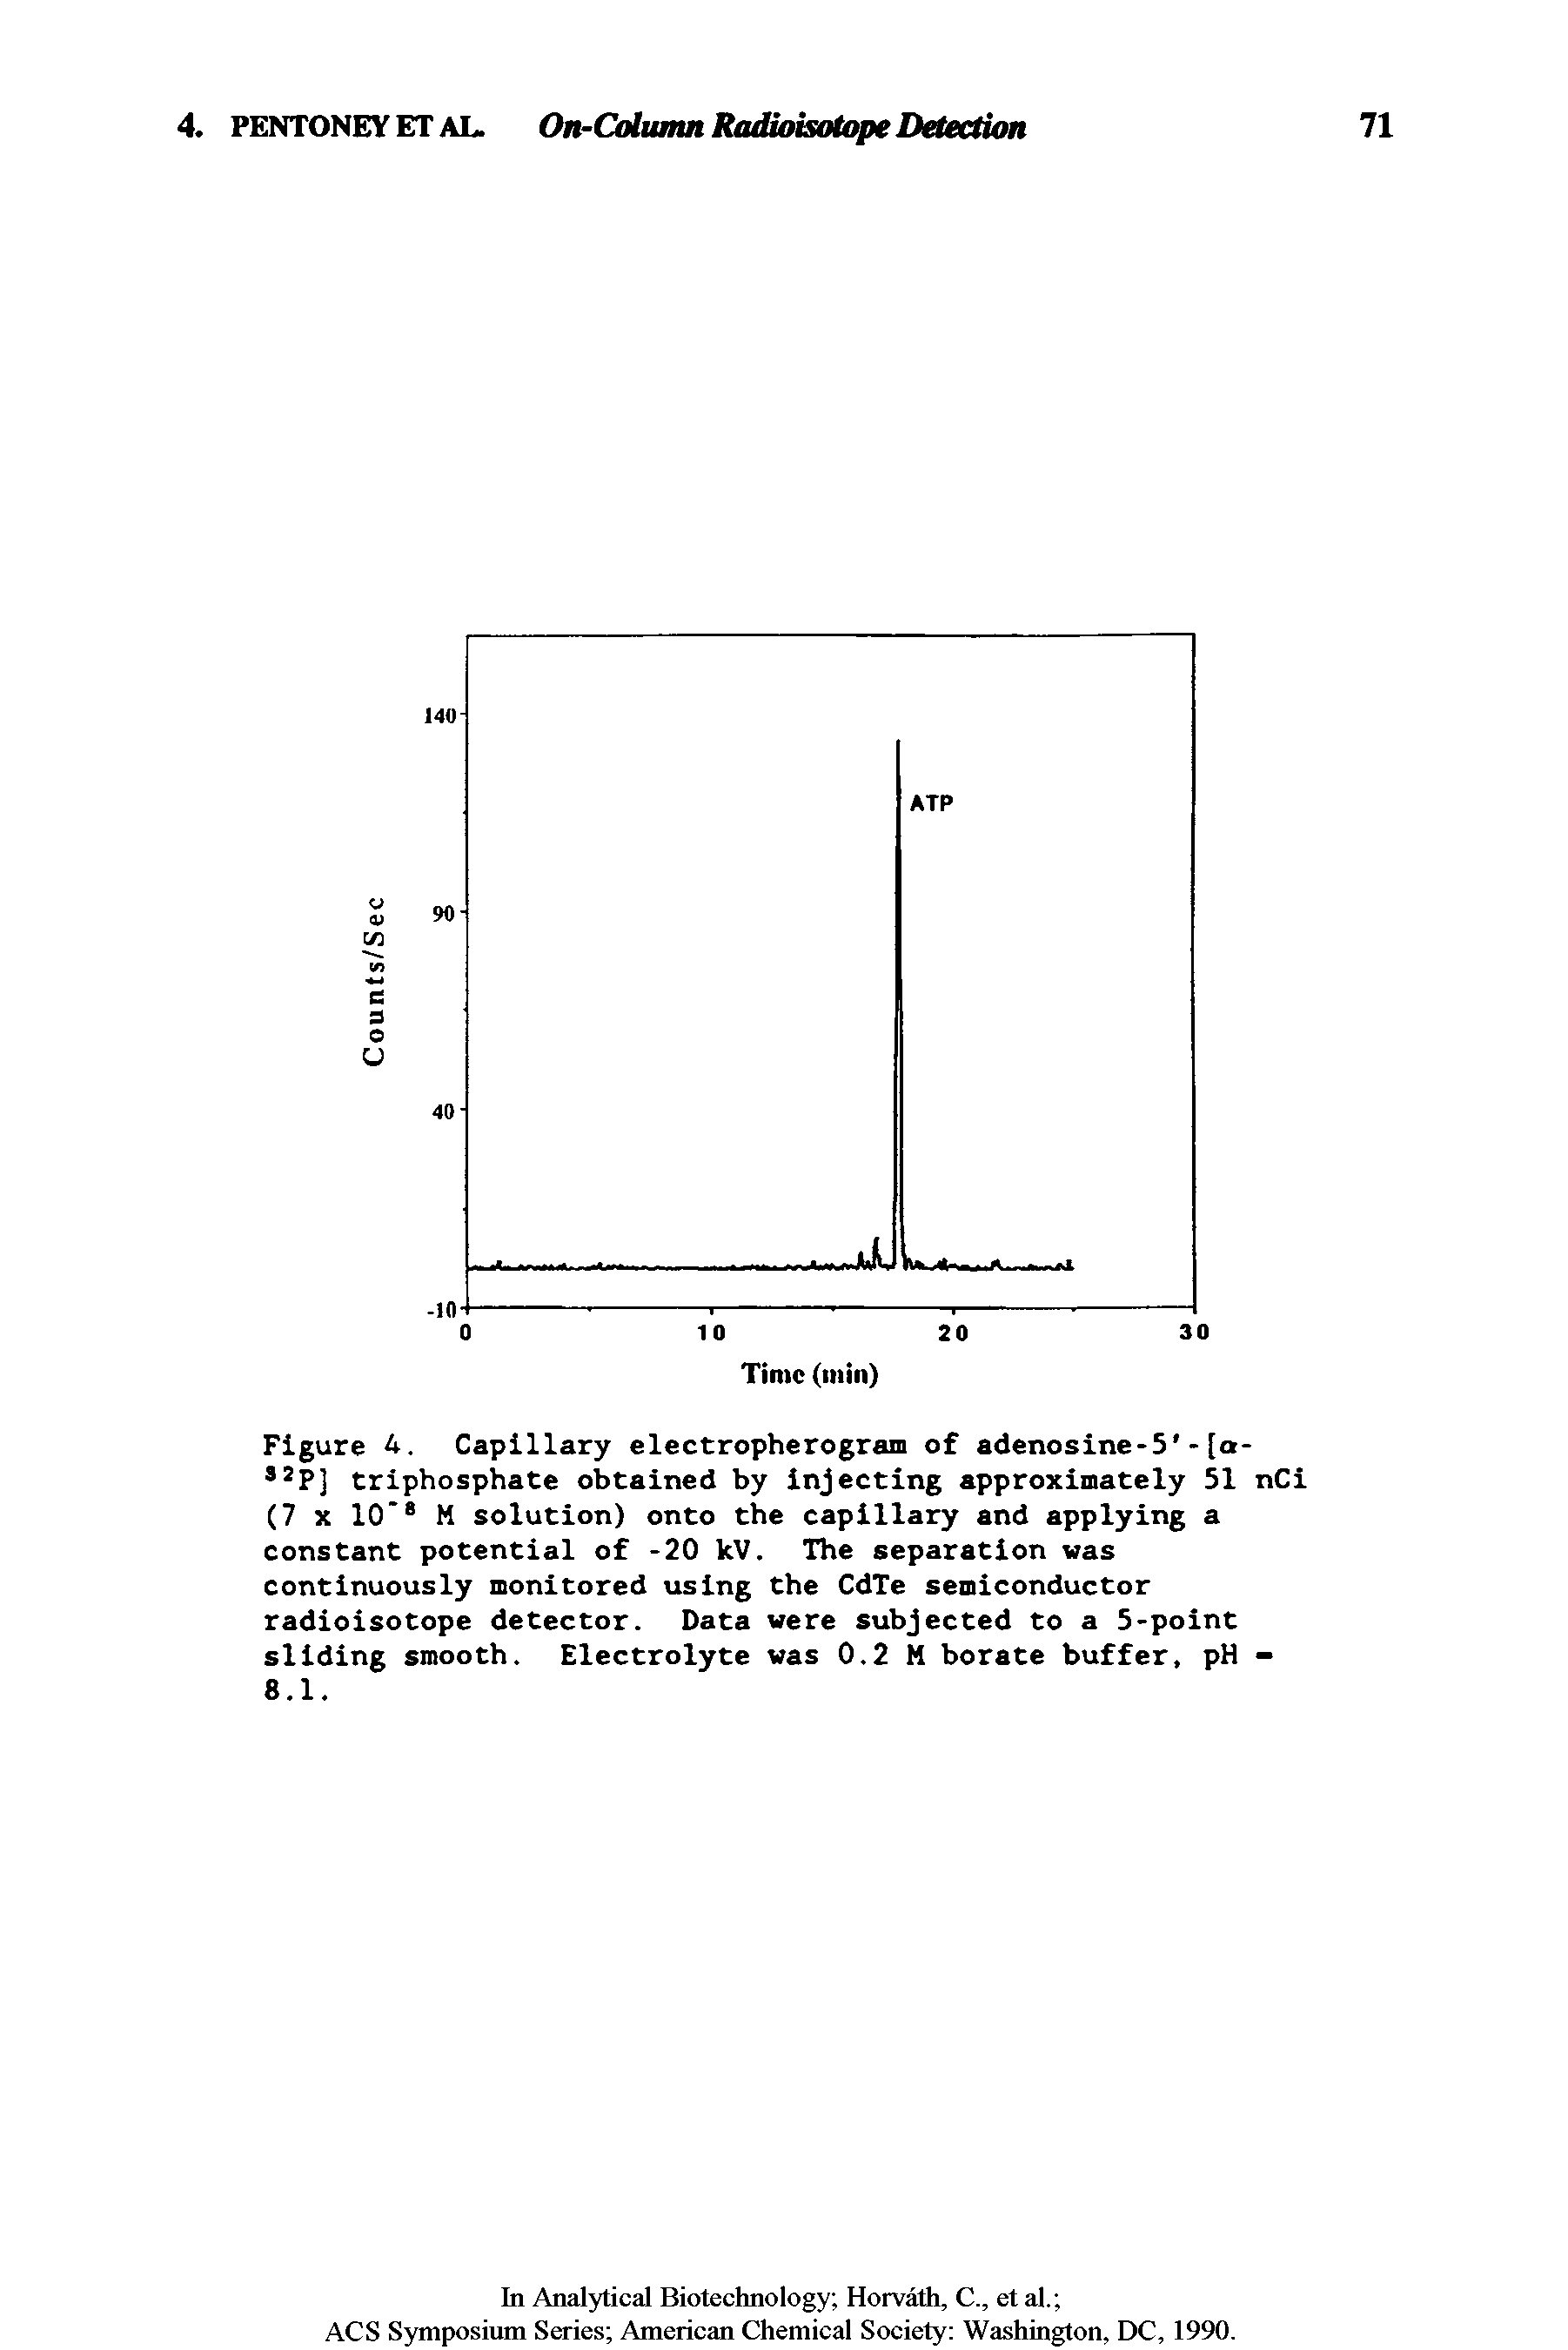 Figure 4. Capillary electropherogram of adenosine-5 -[o-S2P] triphosphate obtained by injecting approximately 51 nCi (7 x 10 M solution) onto the capillary and applying a constant potential of -20 kV. The separation was continuously monitored using the CdTe semiconductor radioisotope detector. Data were subjected to a 5-point sliding smooth. Electrolyte was 0.2 M borate buffer, pH -8.1.